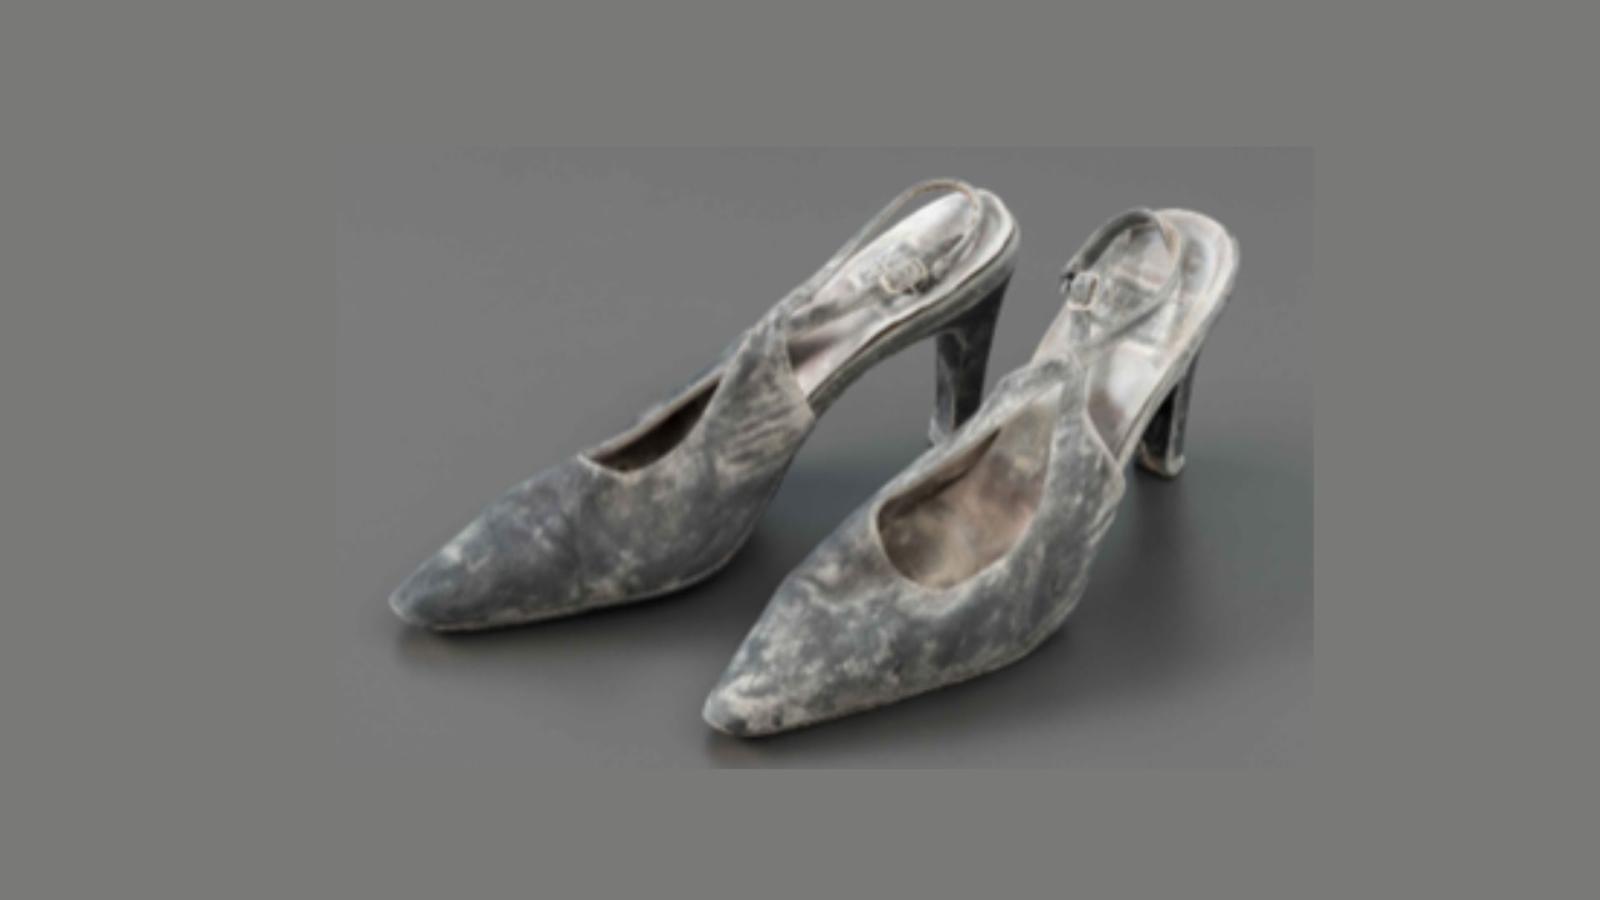 A battered pair of women's shoes, high-heeled and covered in soot